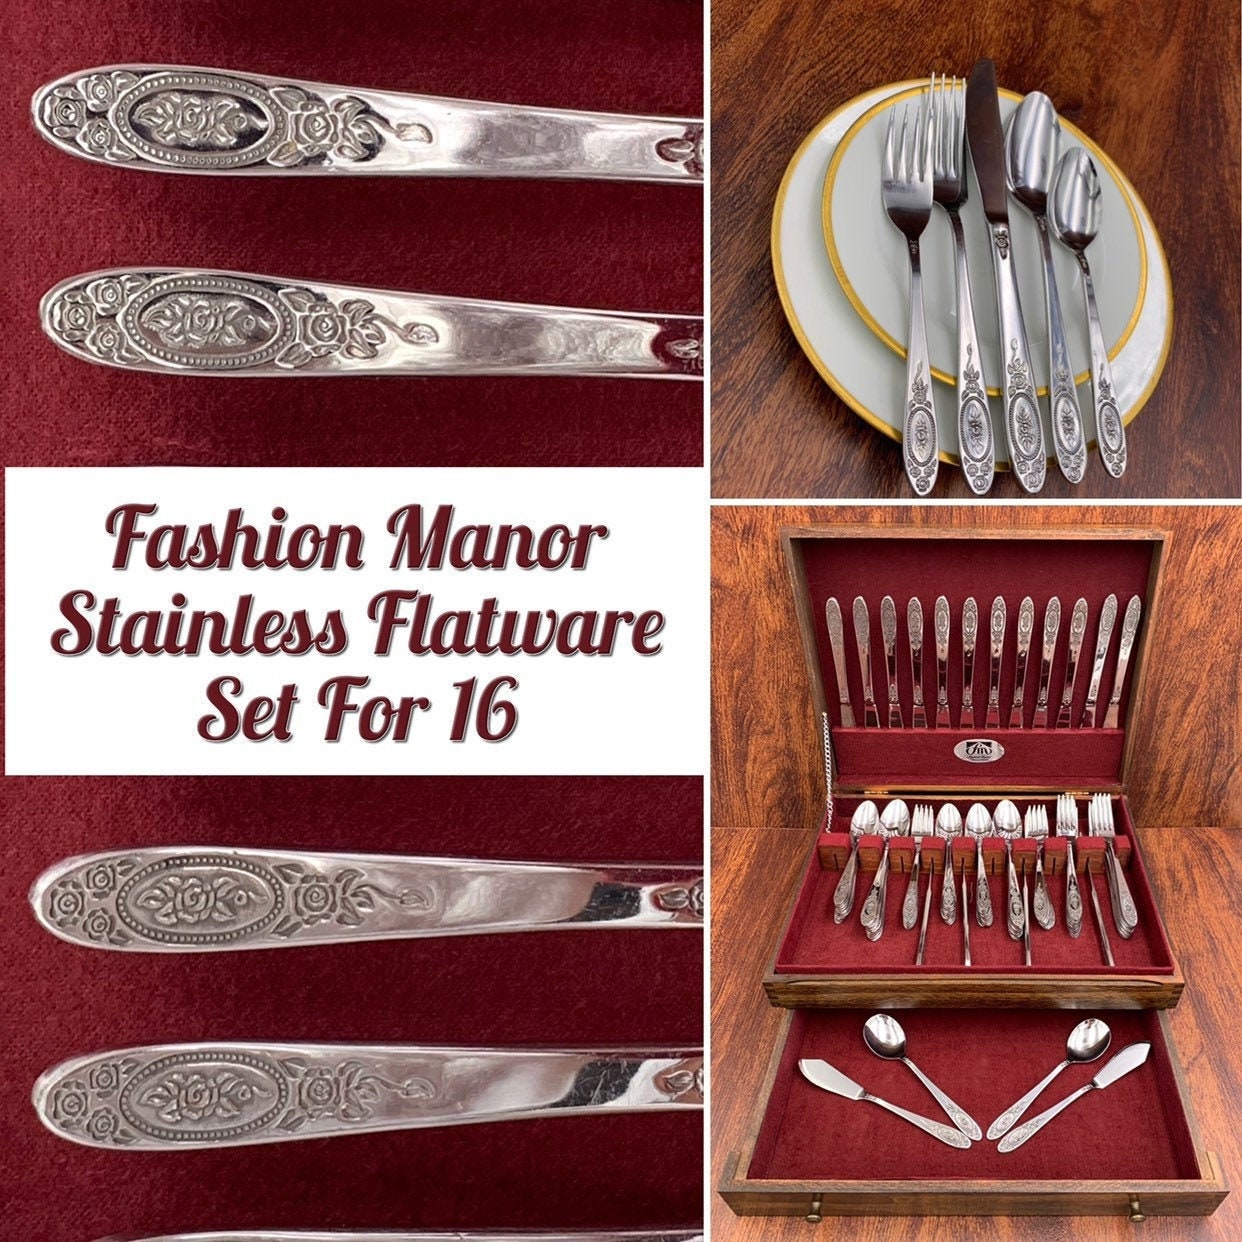 Stainless Flatware set, Service for 16, Fashion Manor Rose Cameo